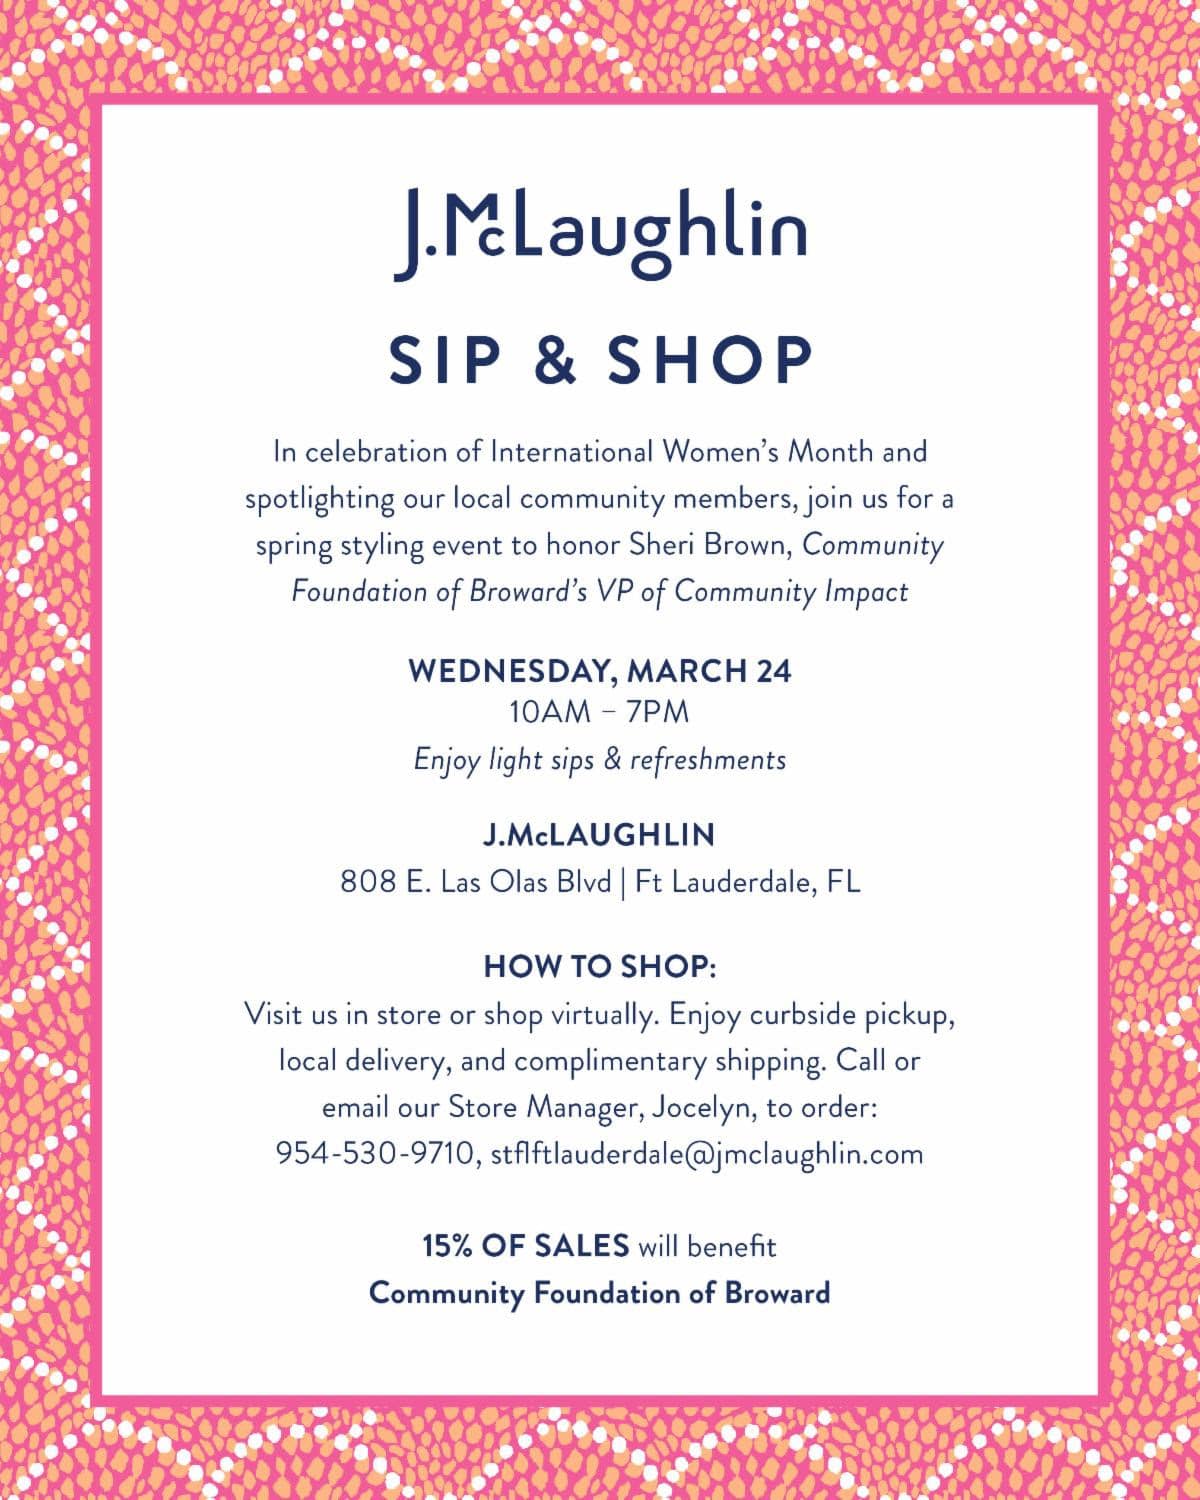 J.McLaughlin | Sip and Shop | Wednesday, March 24th